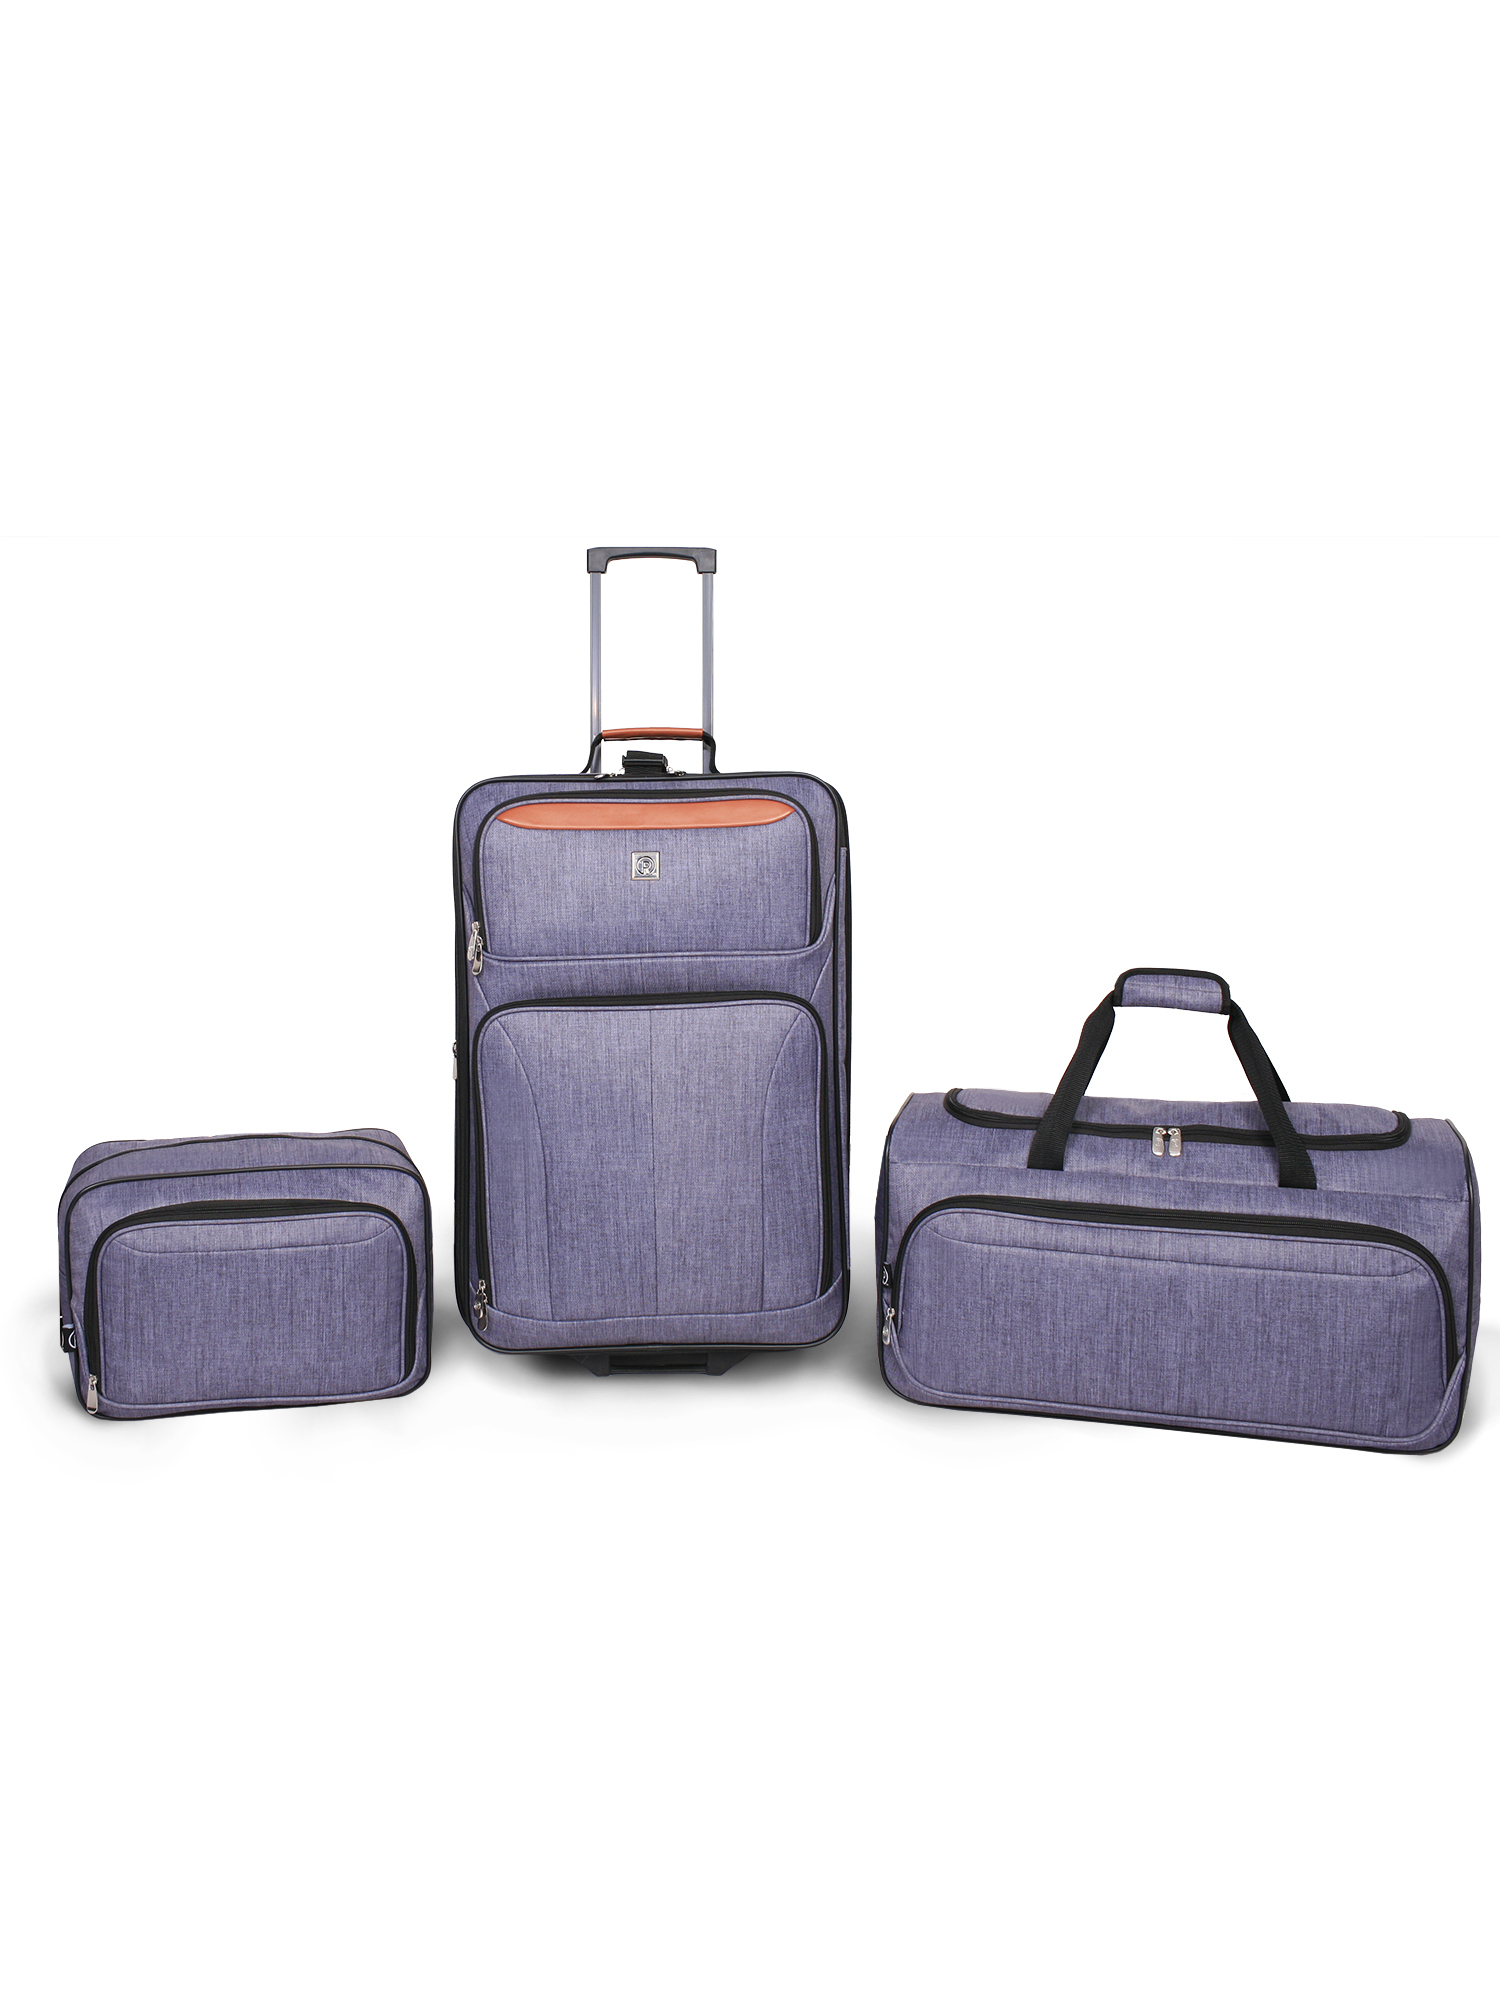 Protege Gray 3pc Travel Luggage Set 24" Check Bag, 22" Duffel, & Boarding Tote - image 1 of 9